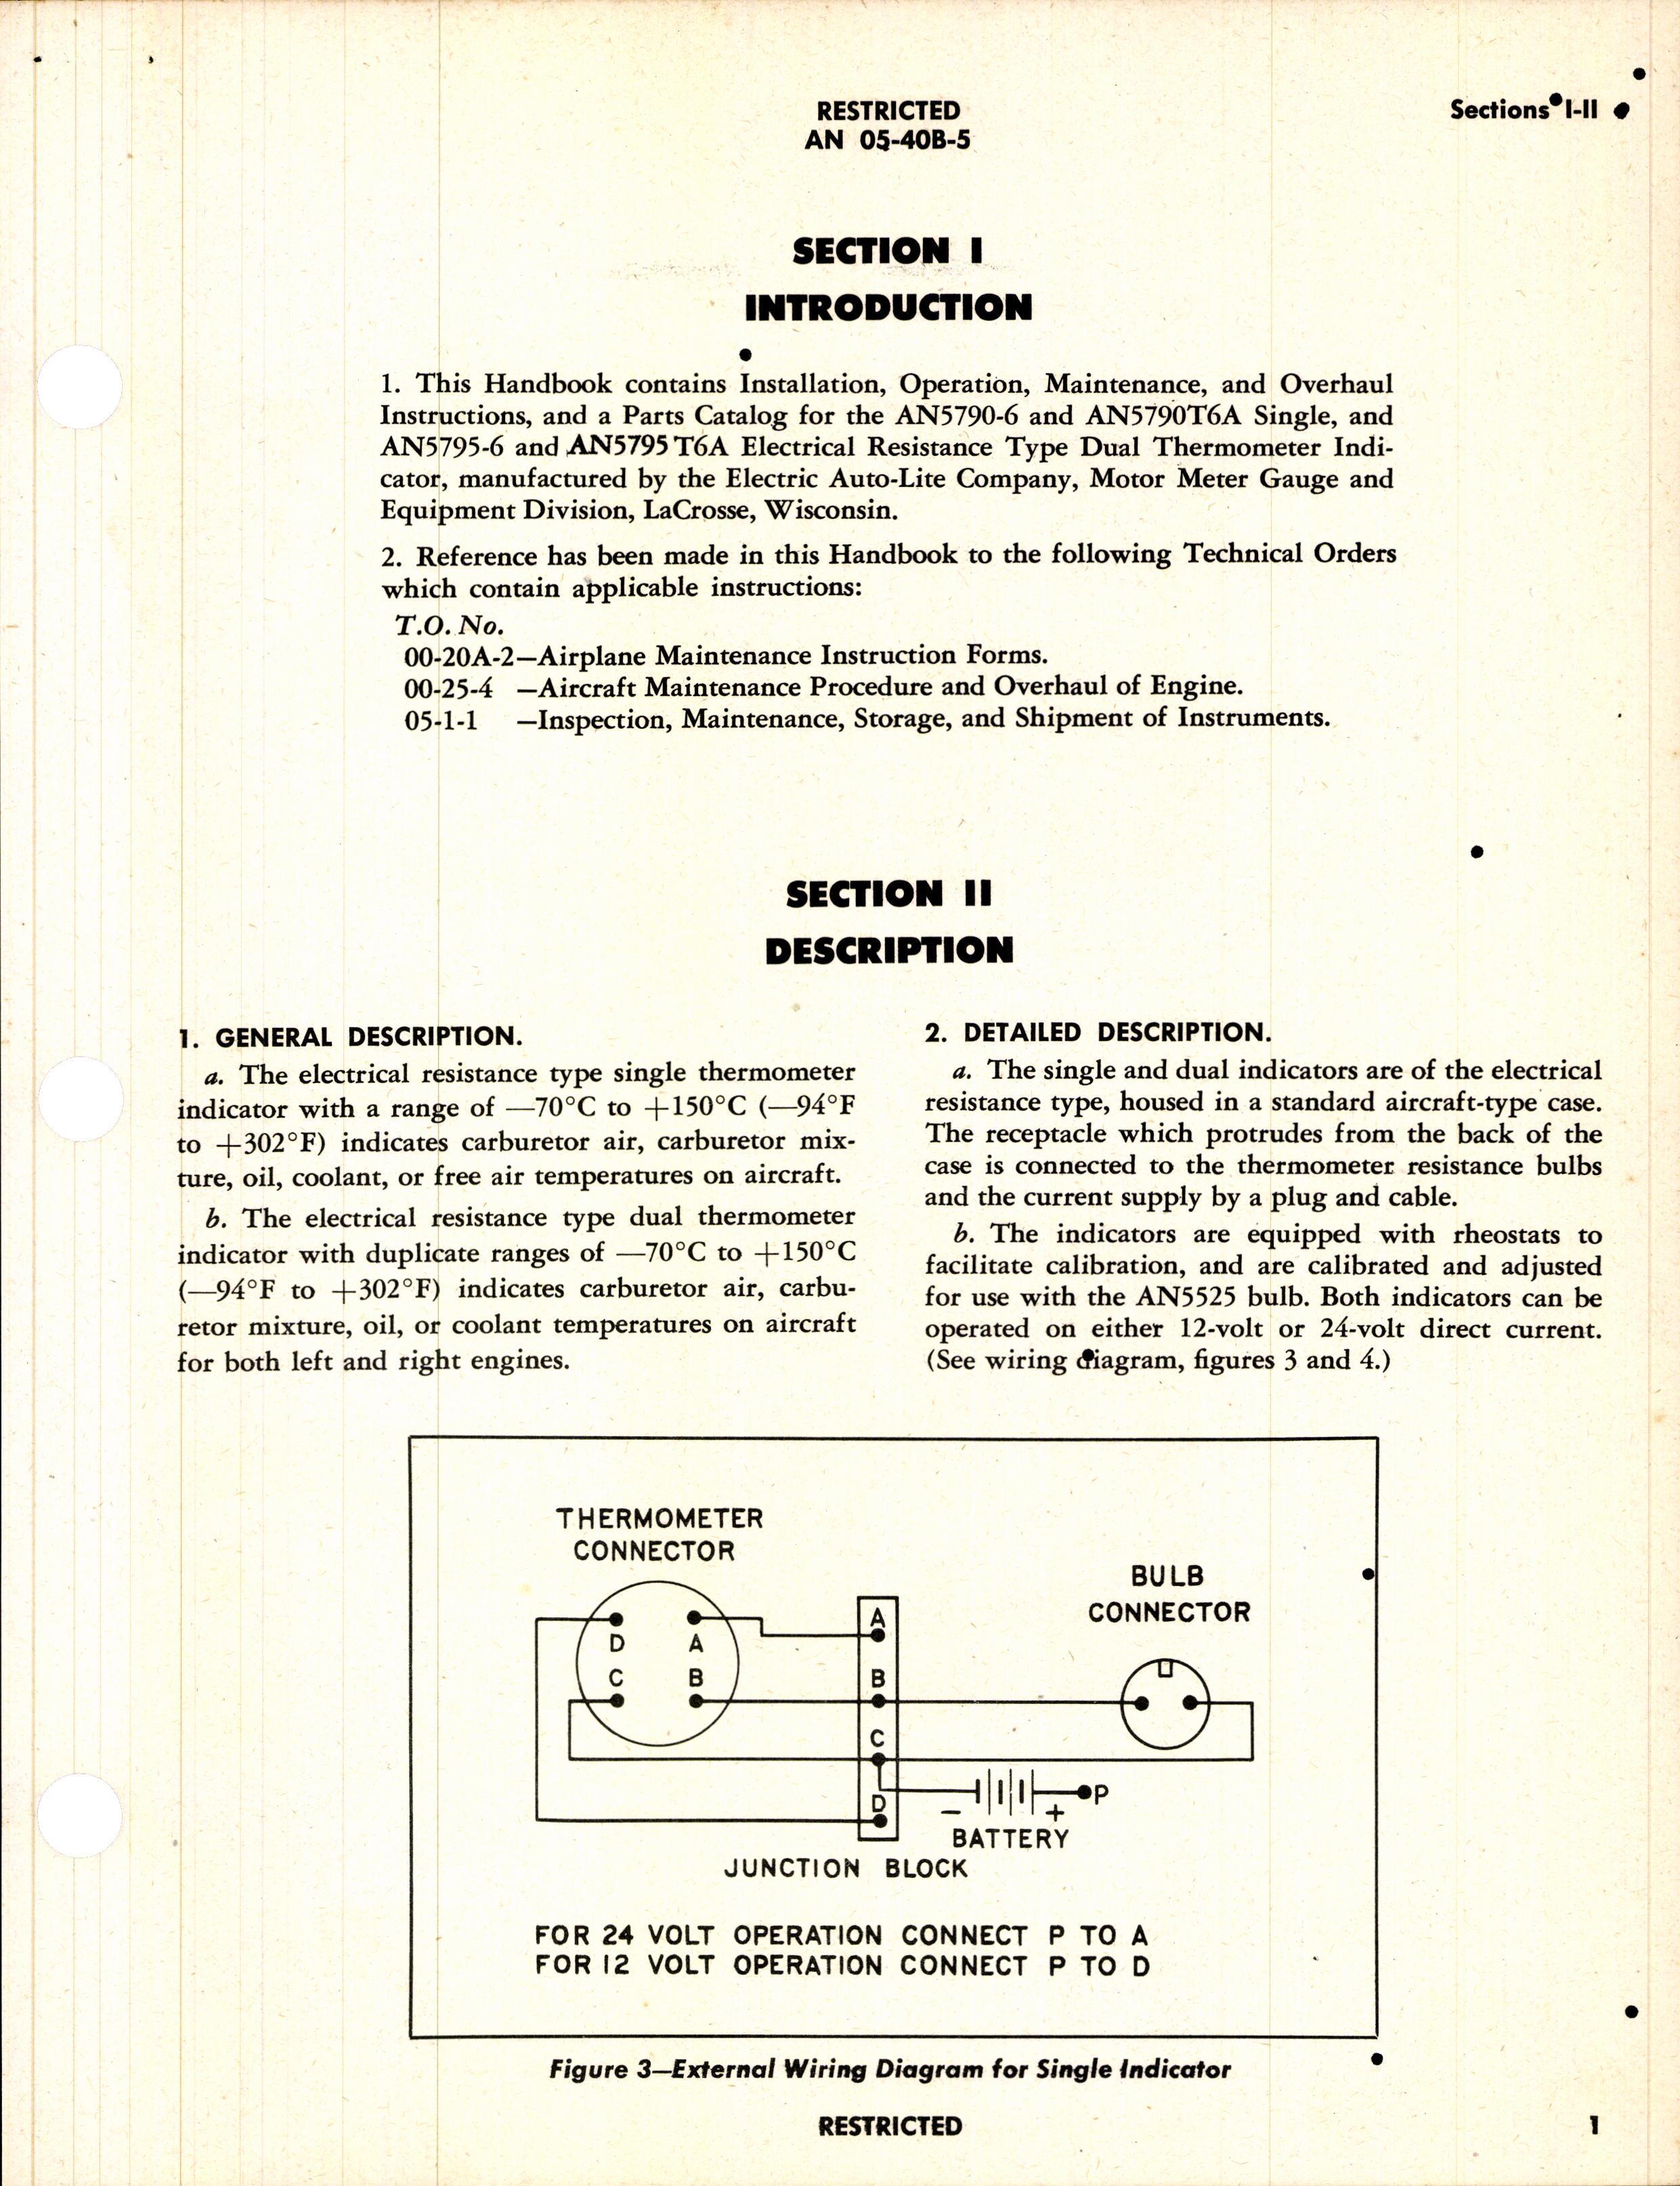 Sample page 5 from AirCorps Library document: Operation, Service, & Overhaul Instructions with Parts Catalog for Thermometer Indicators